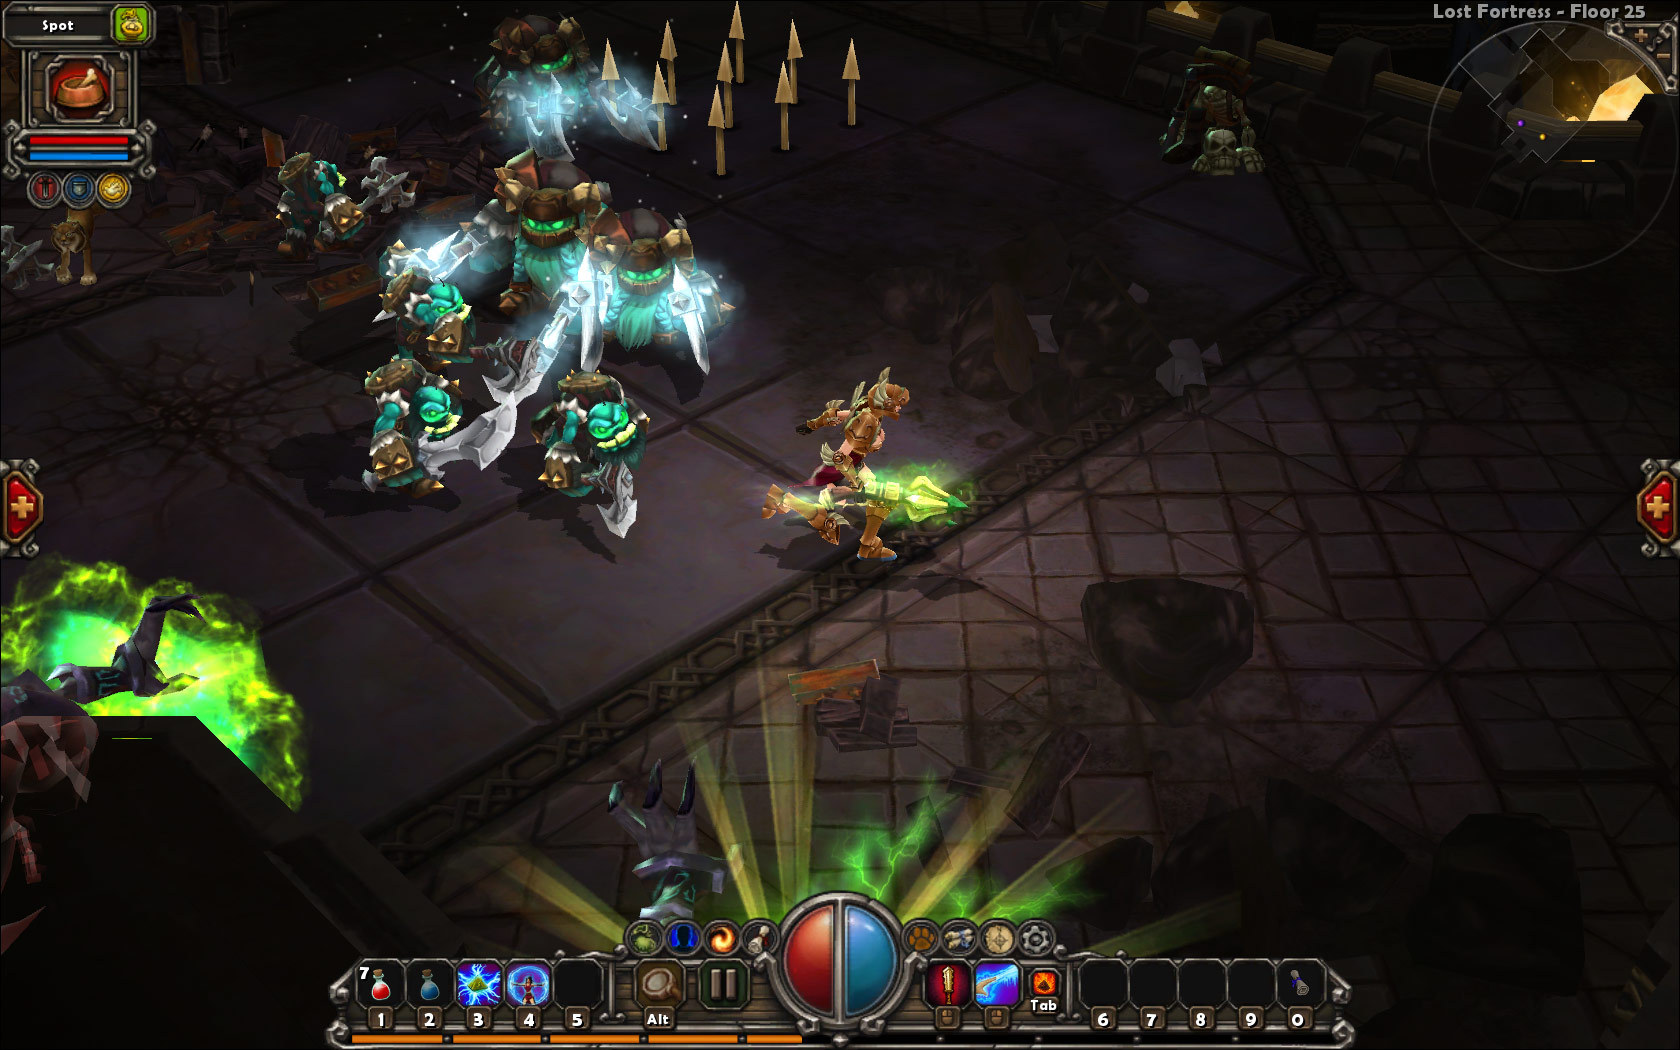 free download torchlight 2 game